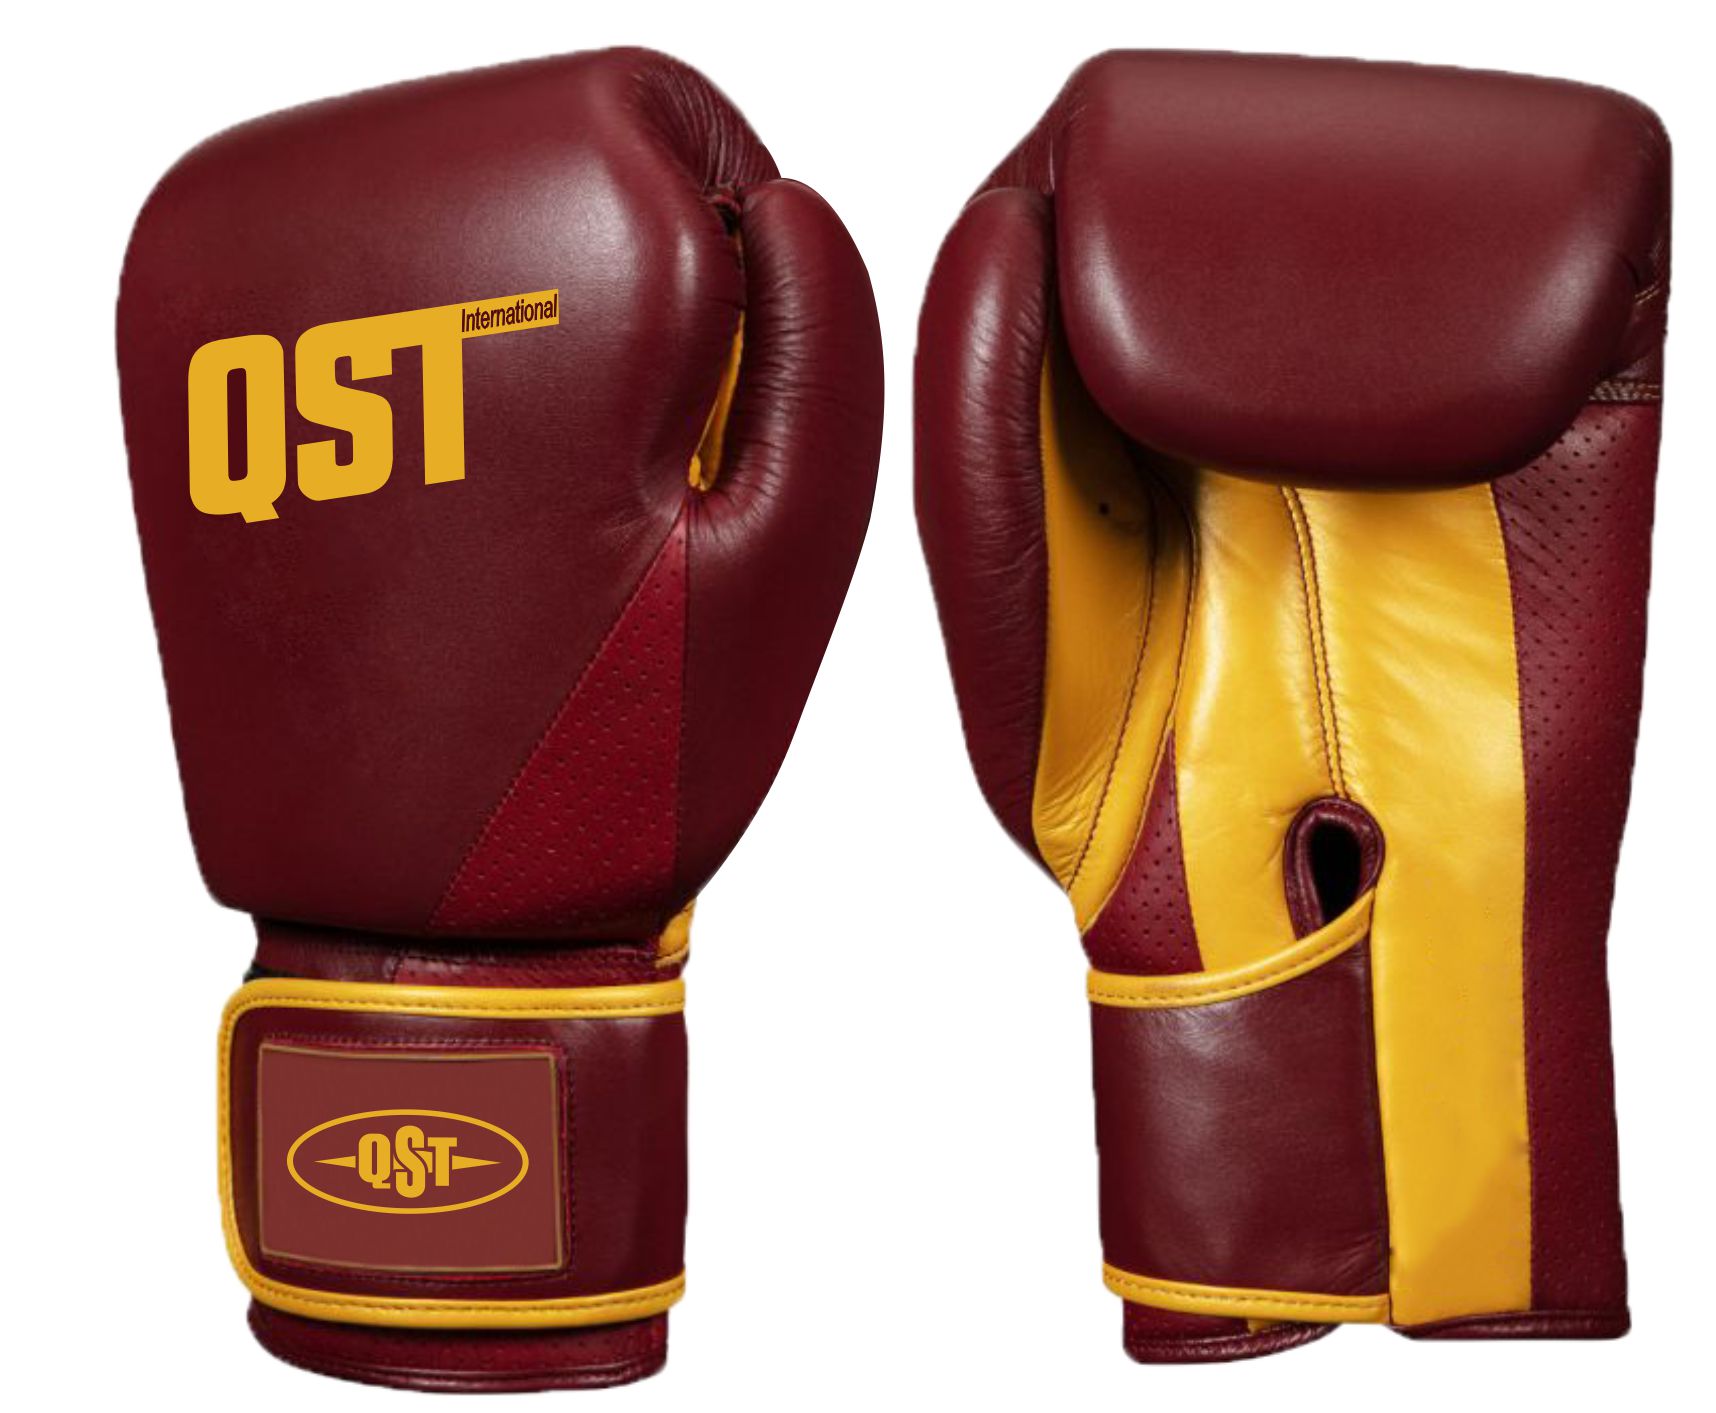 Professional Boxing Gloves - PRG-1509